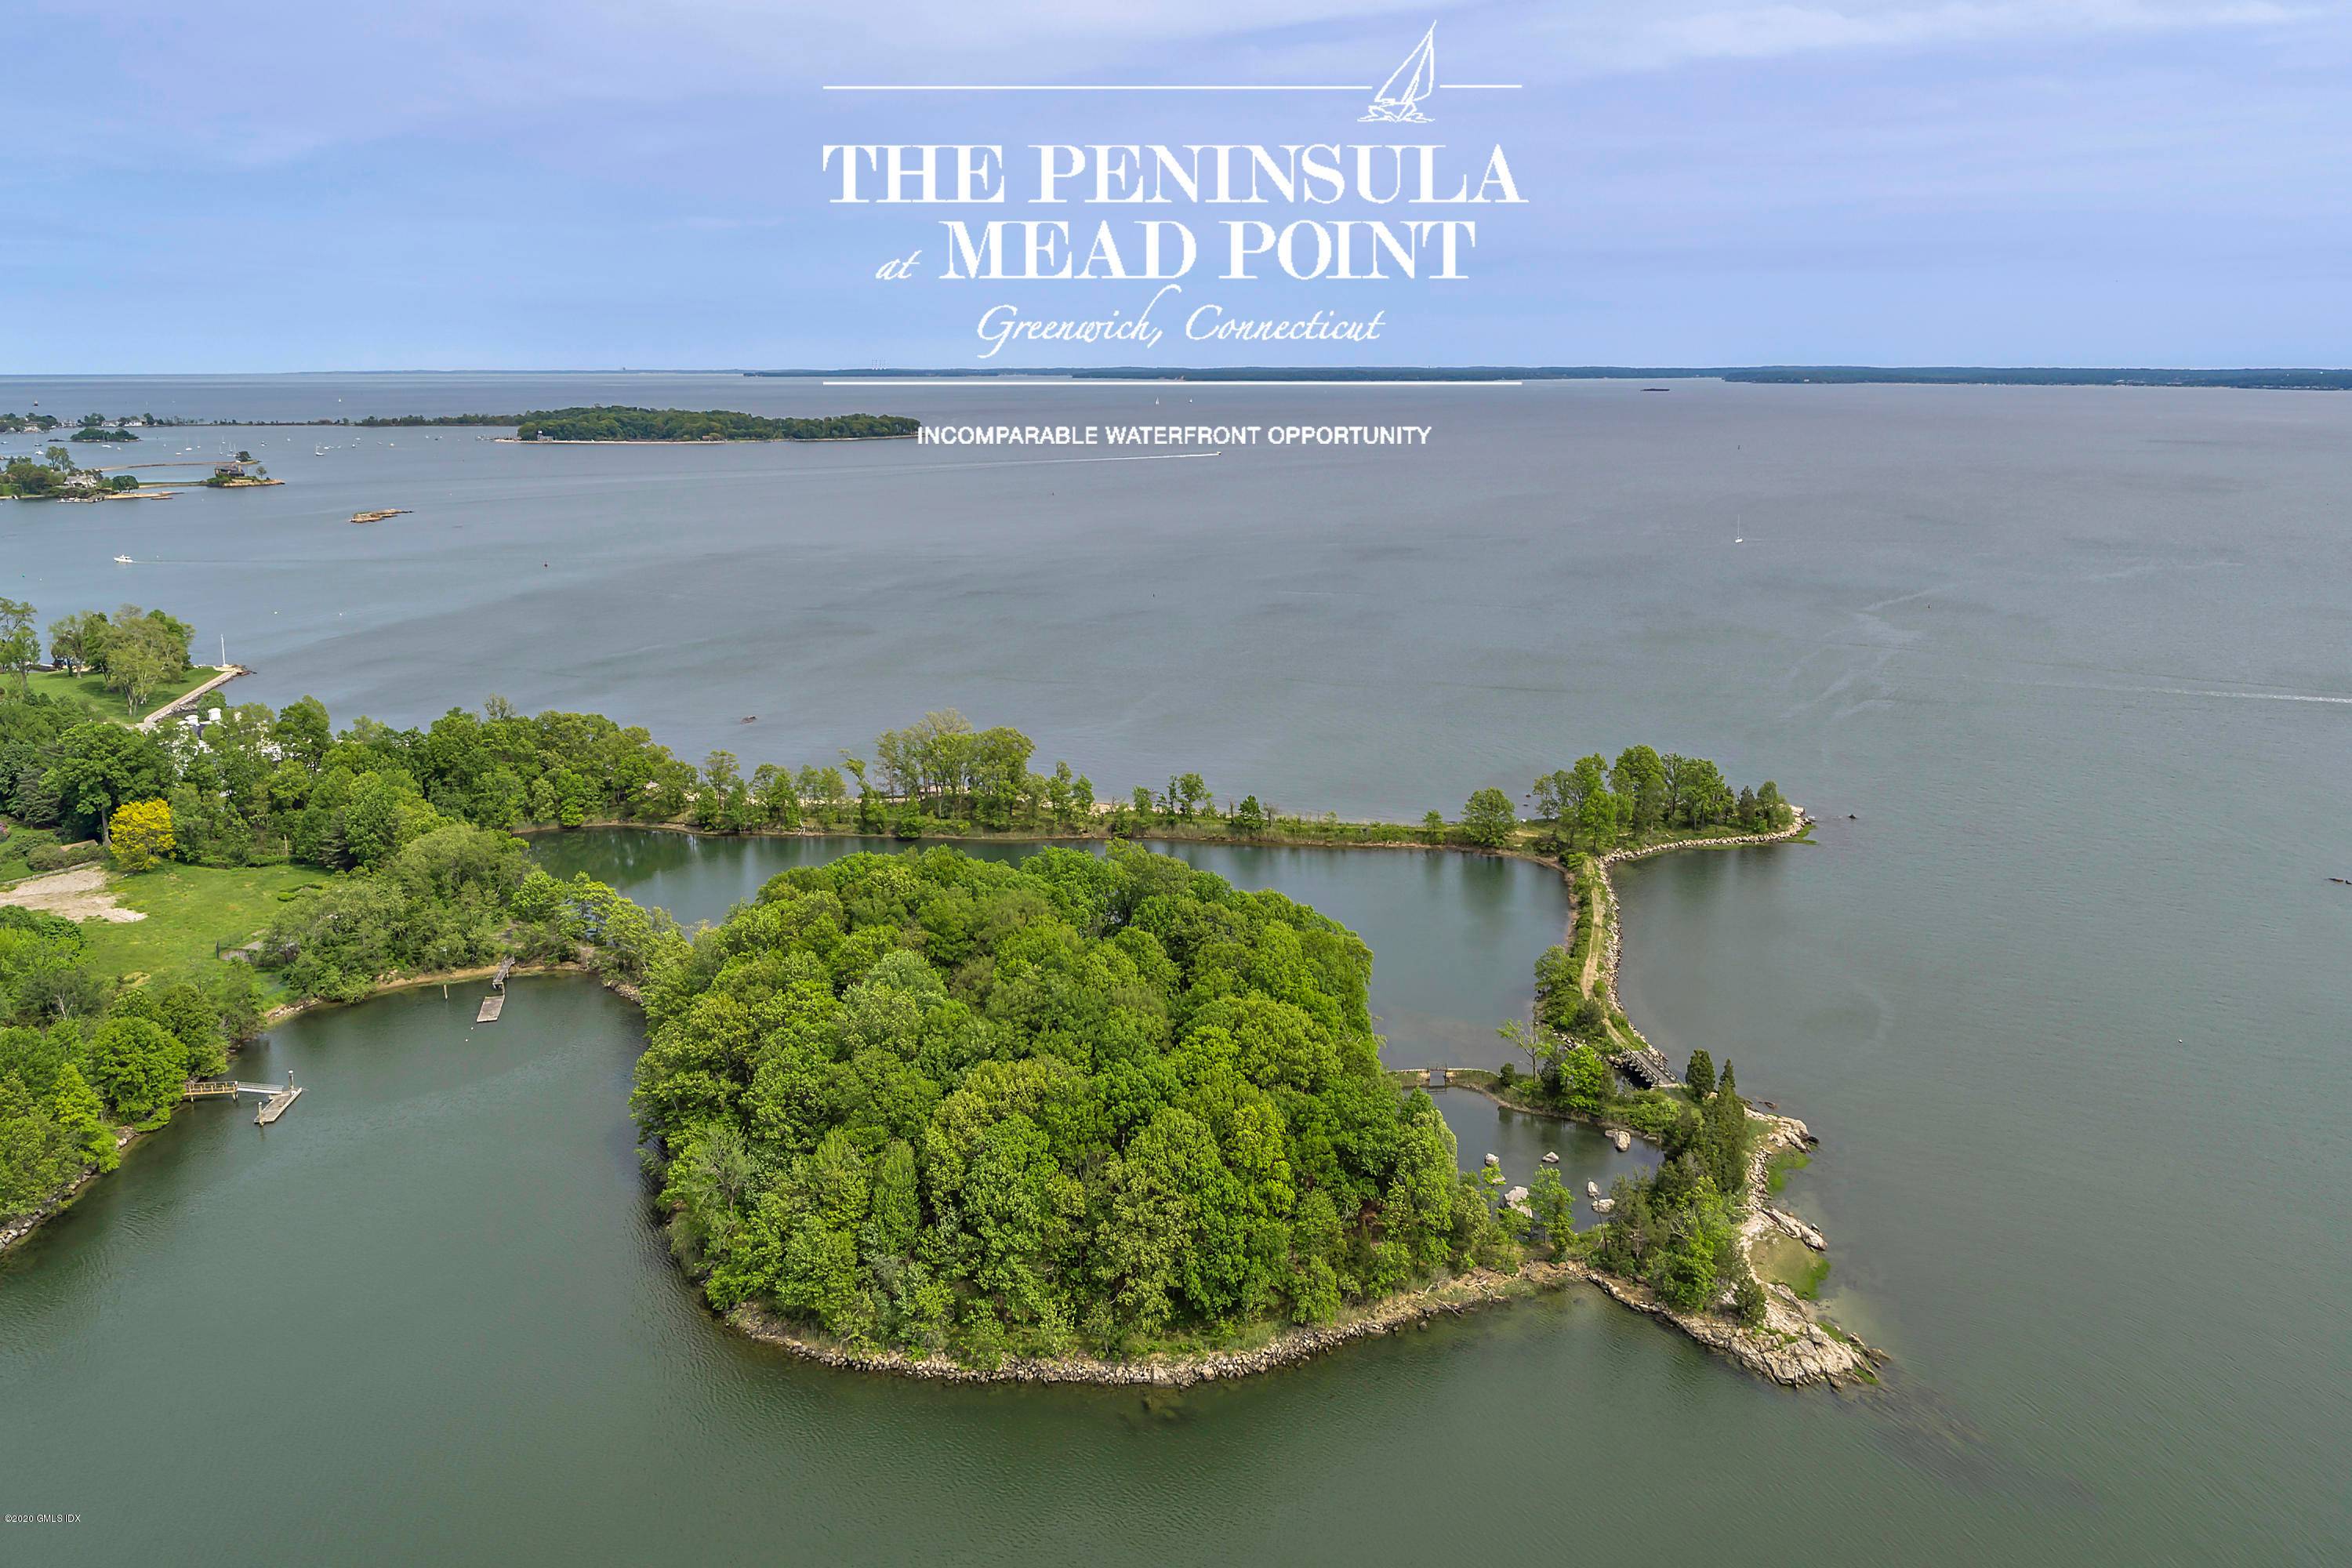 Rarely does an opportunity come along to develop on pristine Long Island Sound property in the exclusive, guard gated waterfront Mead Point Association.